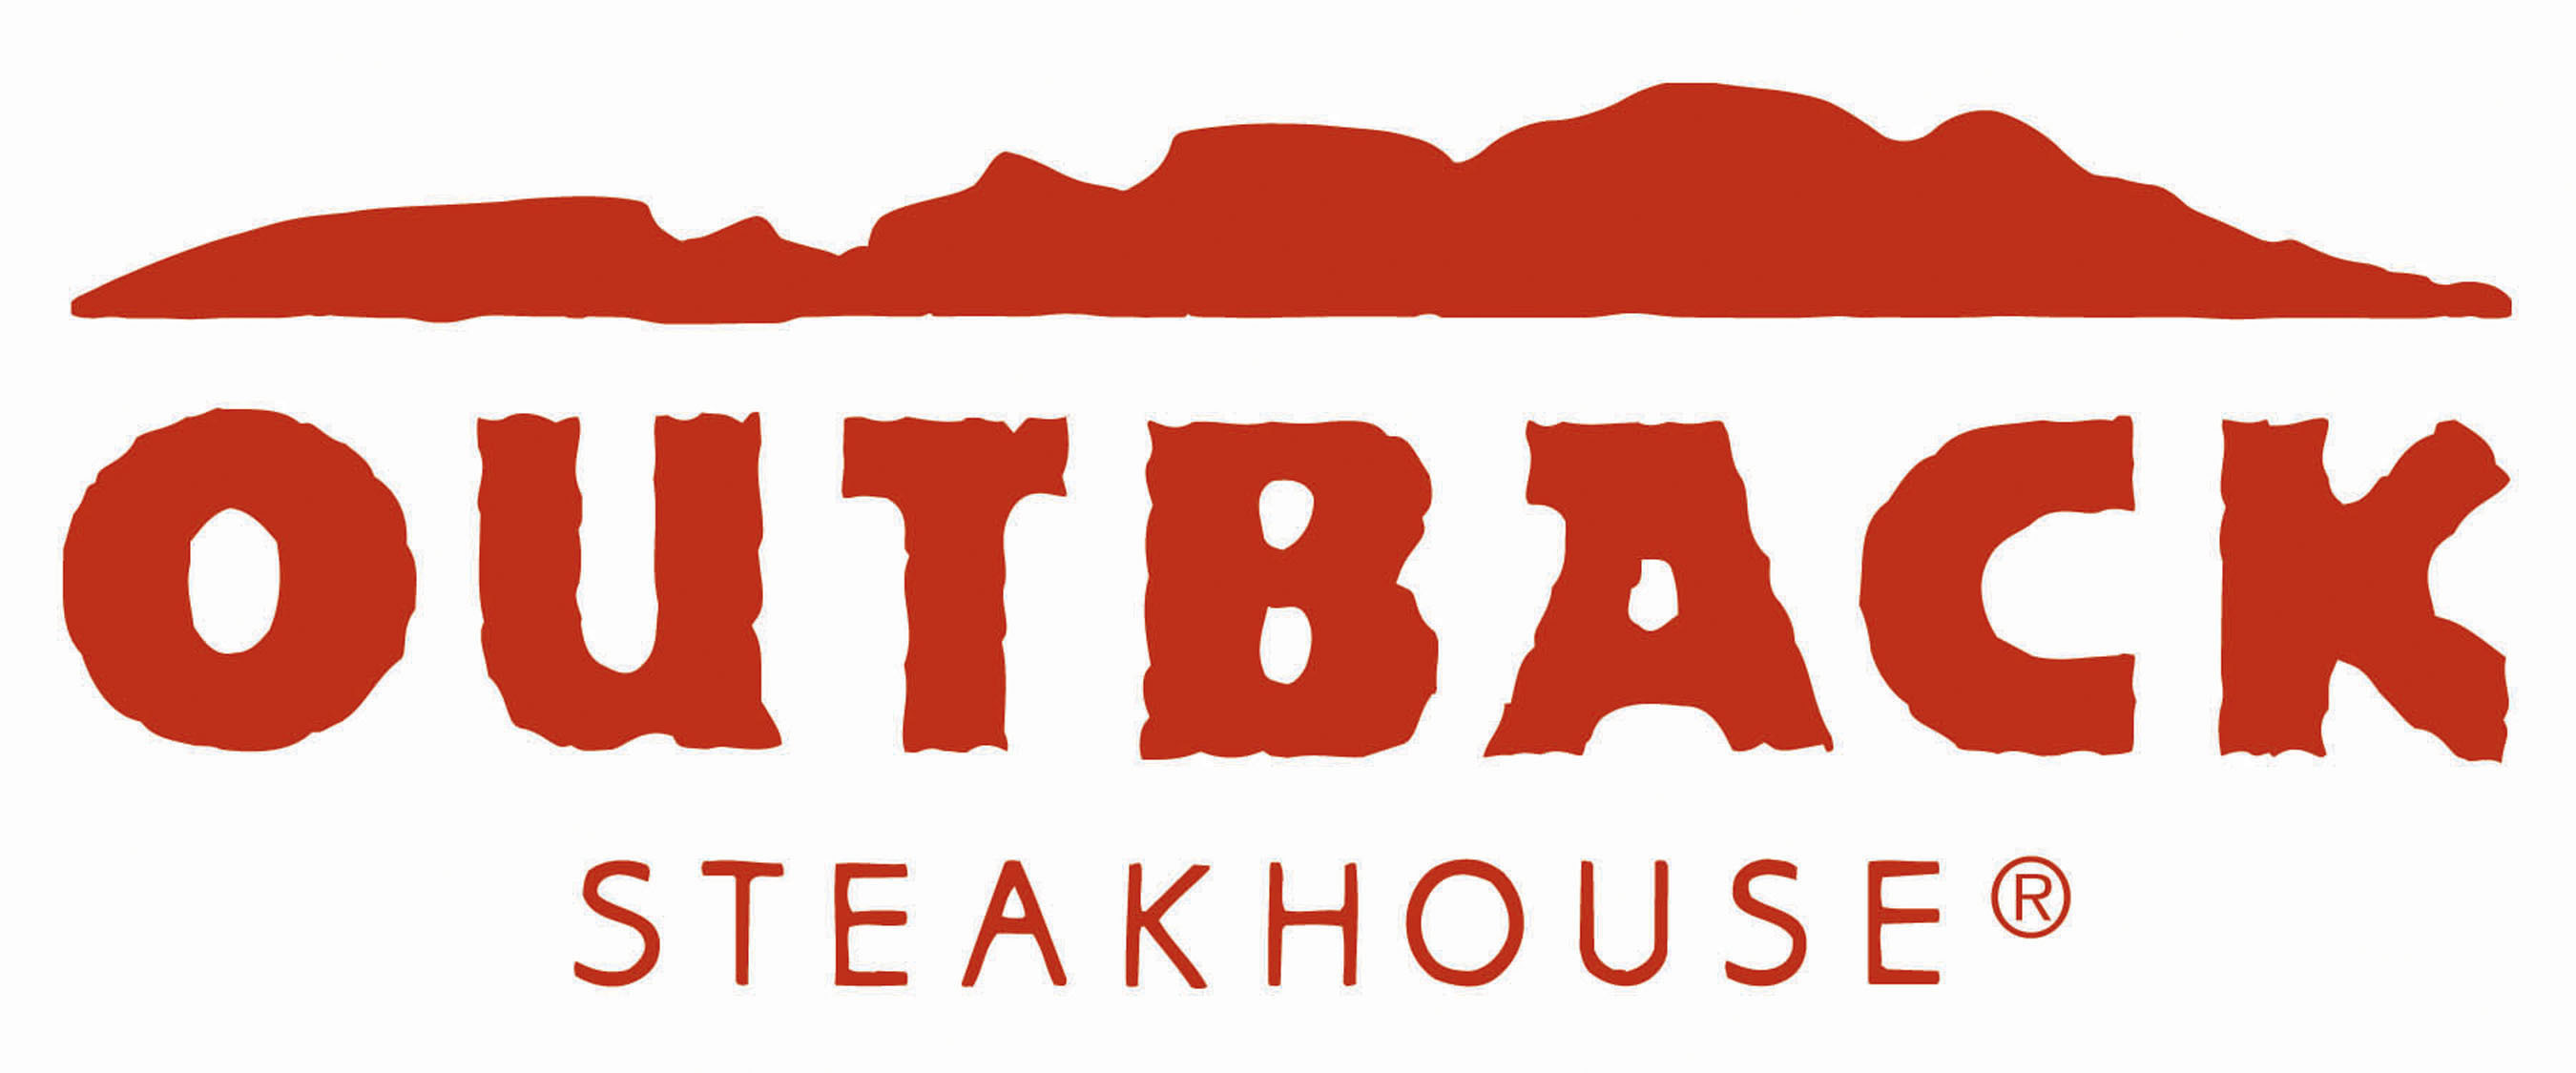 Outback Steakhouse.